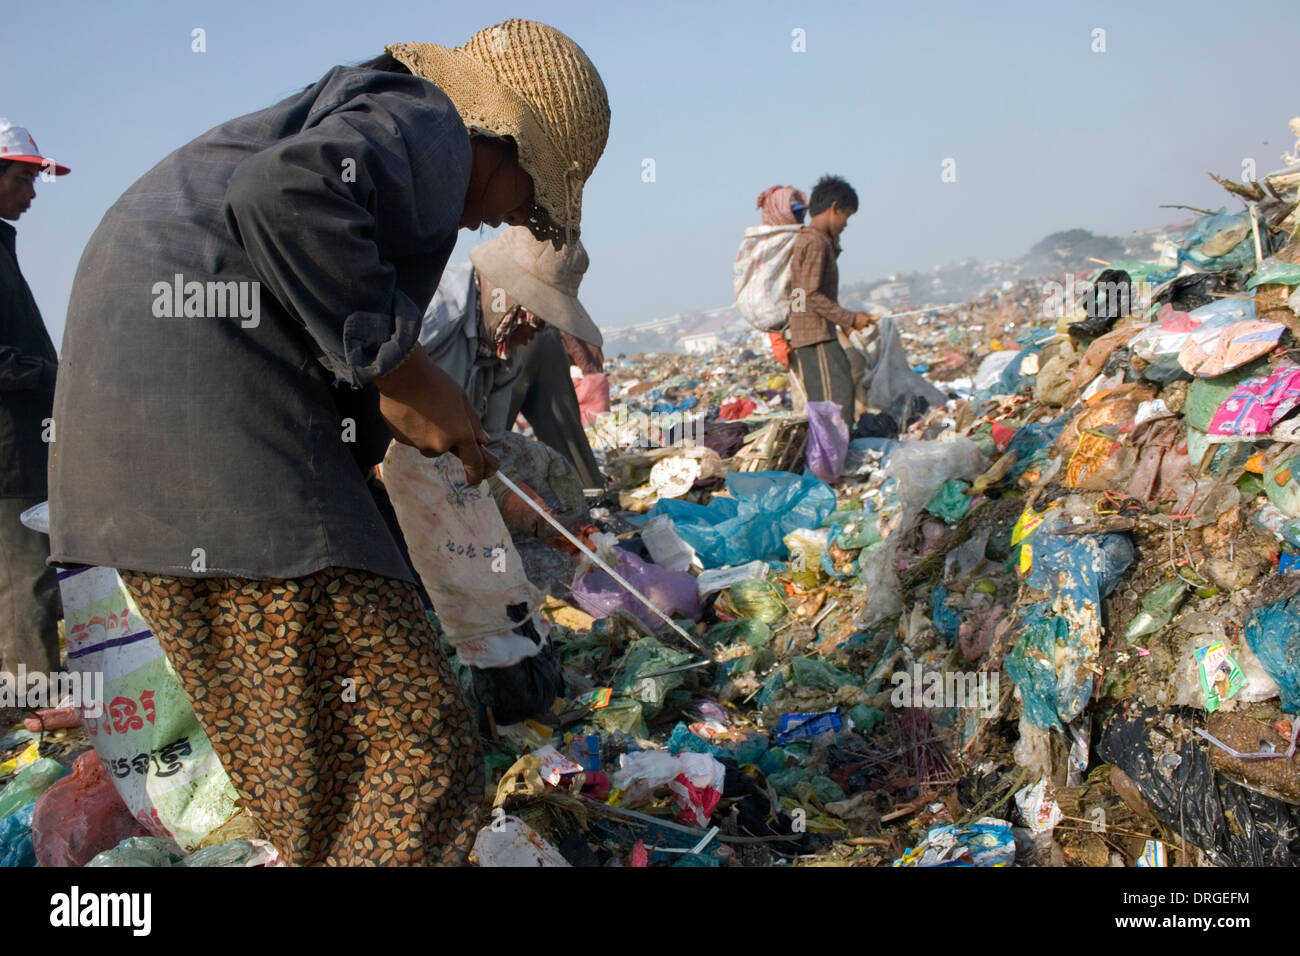 Scavengers are collecting recyclable material at the toxic and polluted Stung Meanchey Landfill in Phnom Penh, Cambodia. Stock Photo